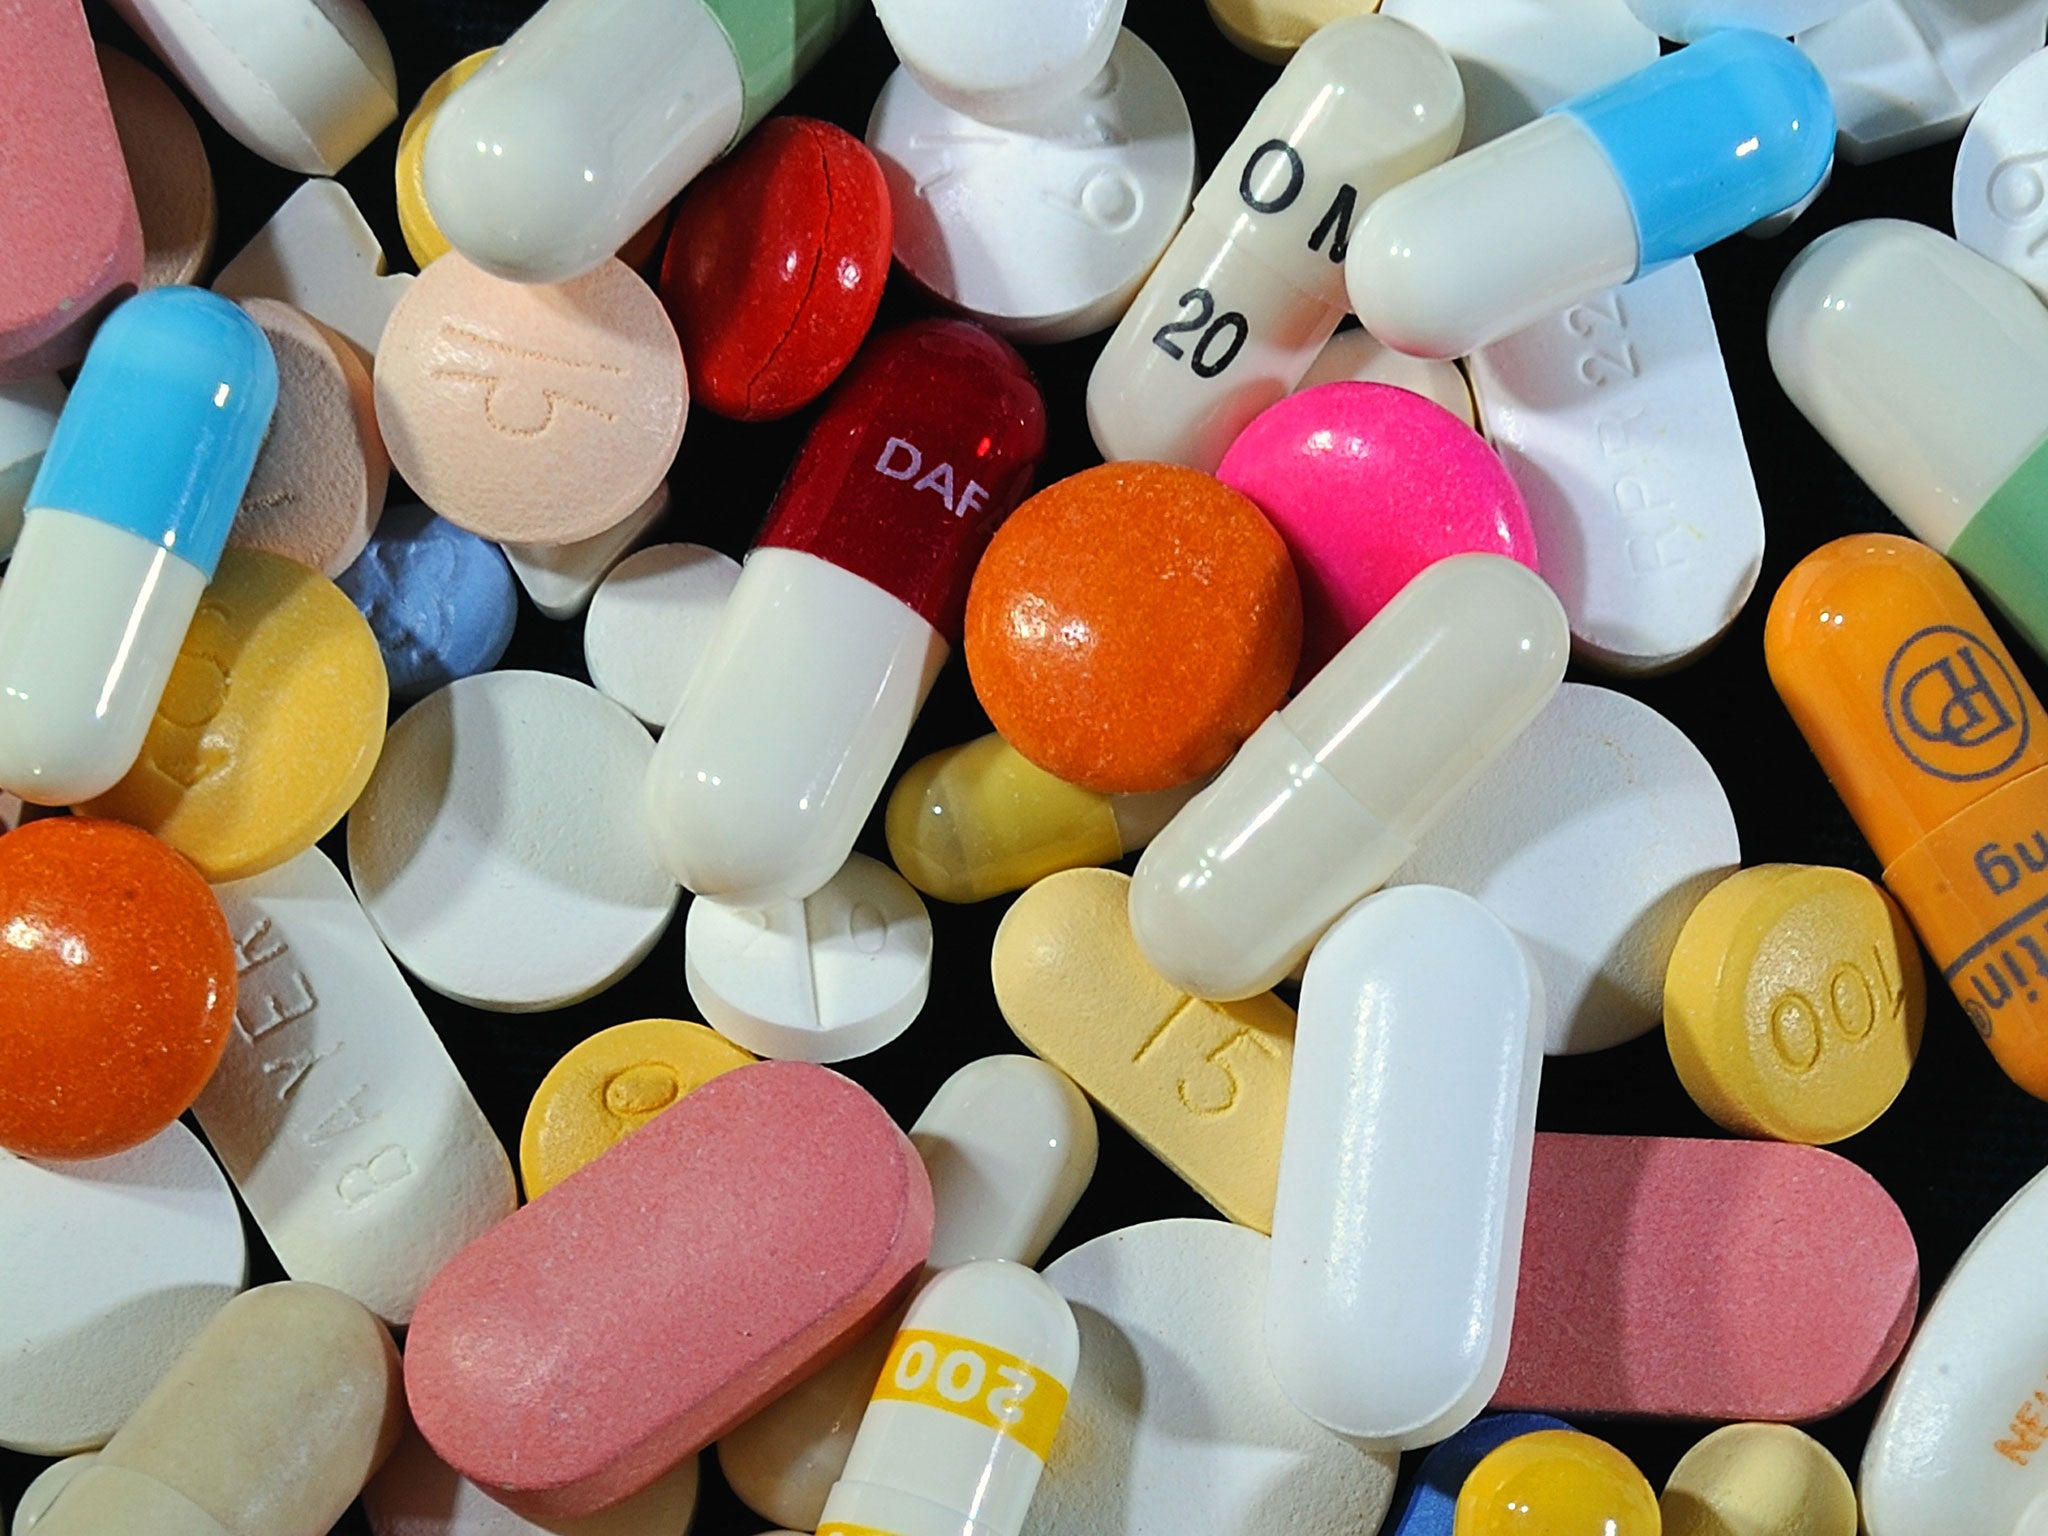 90 per cent of GPs reported being pressured into prescribing antibiotics to patients